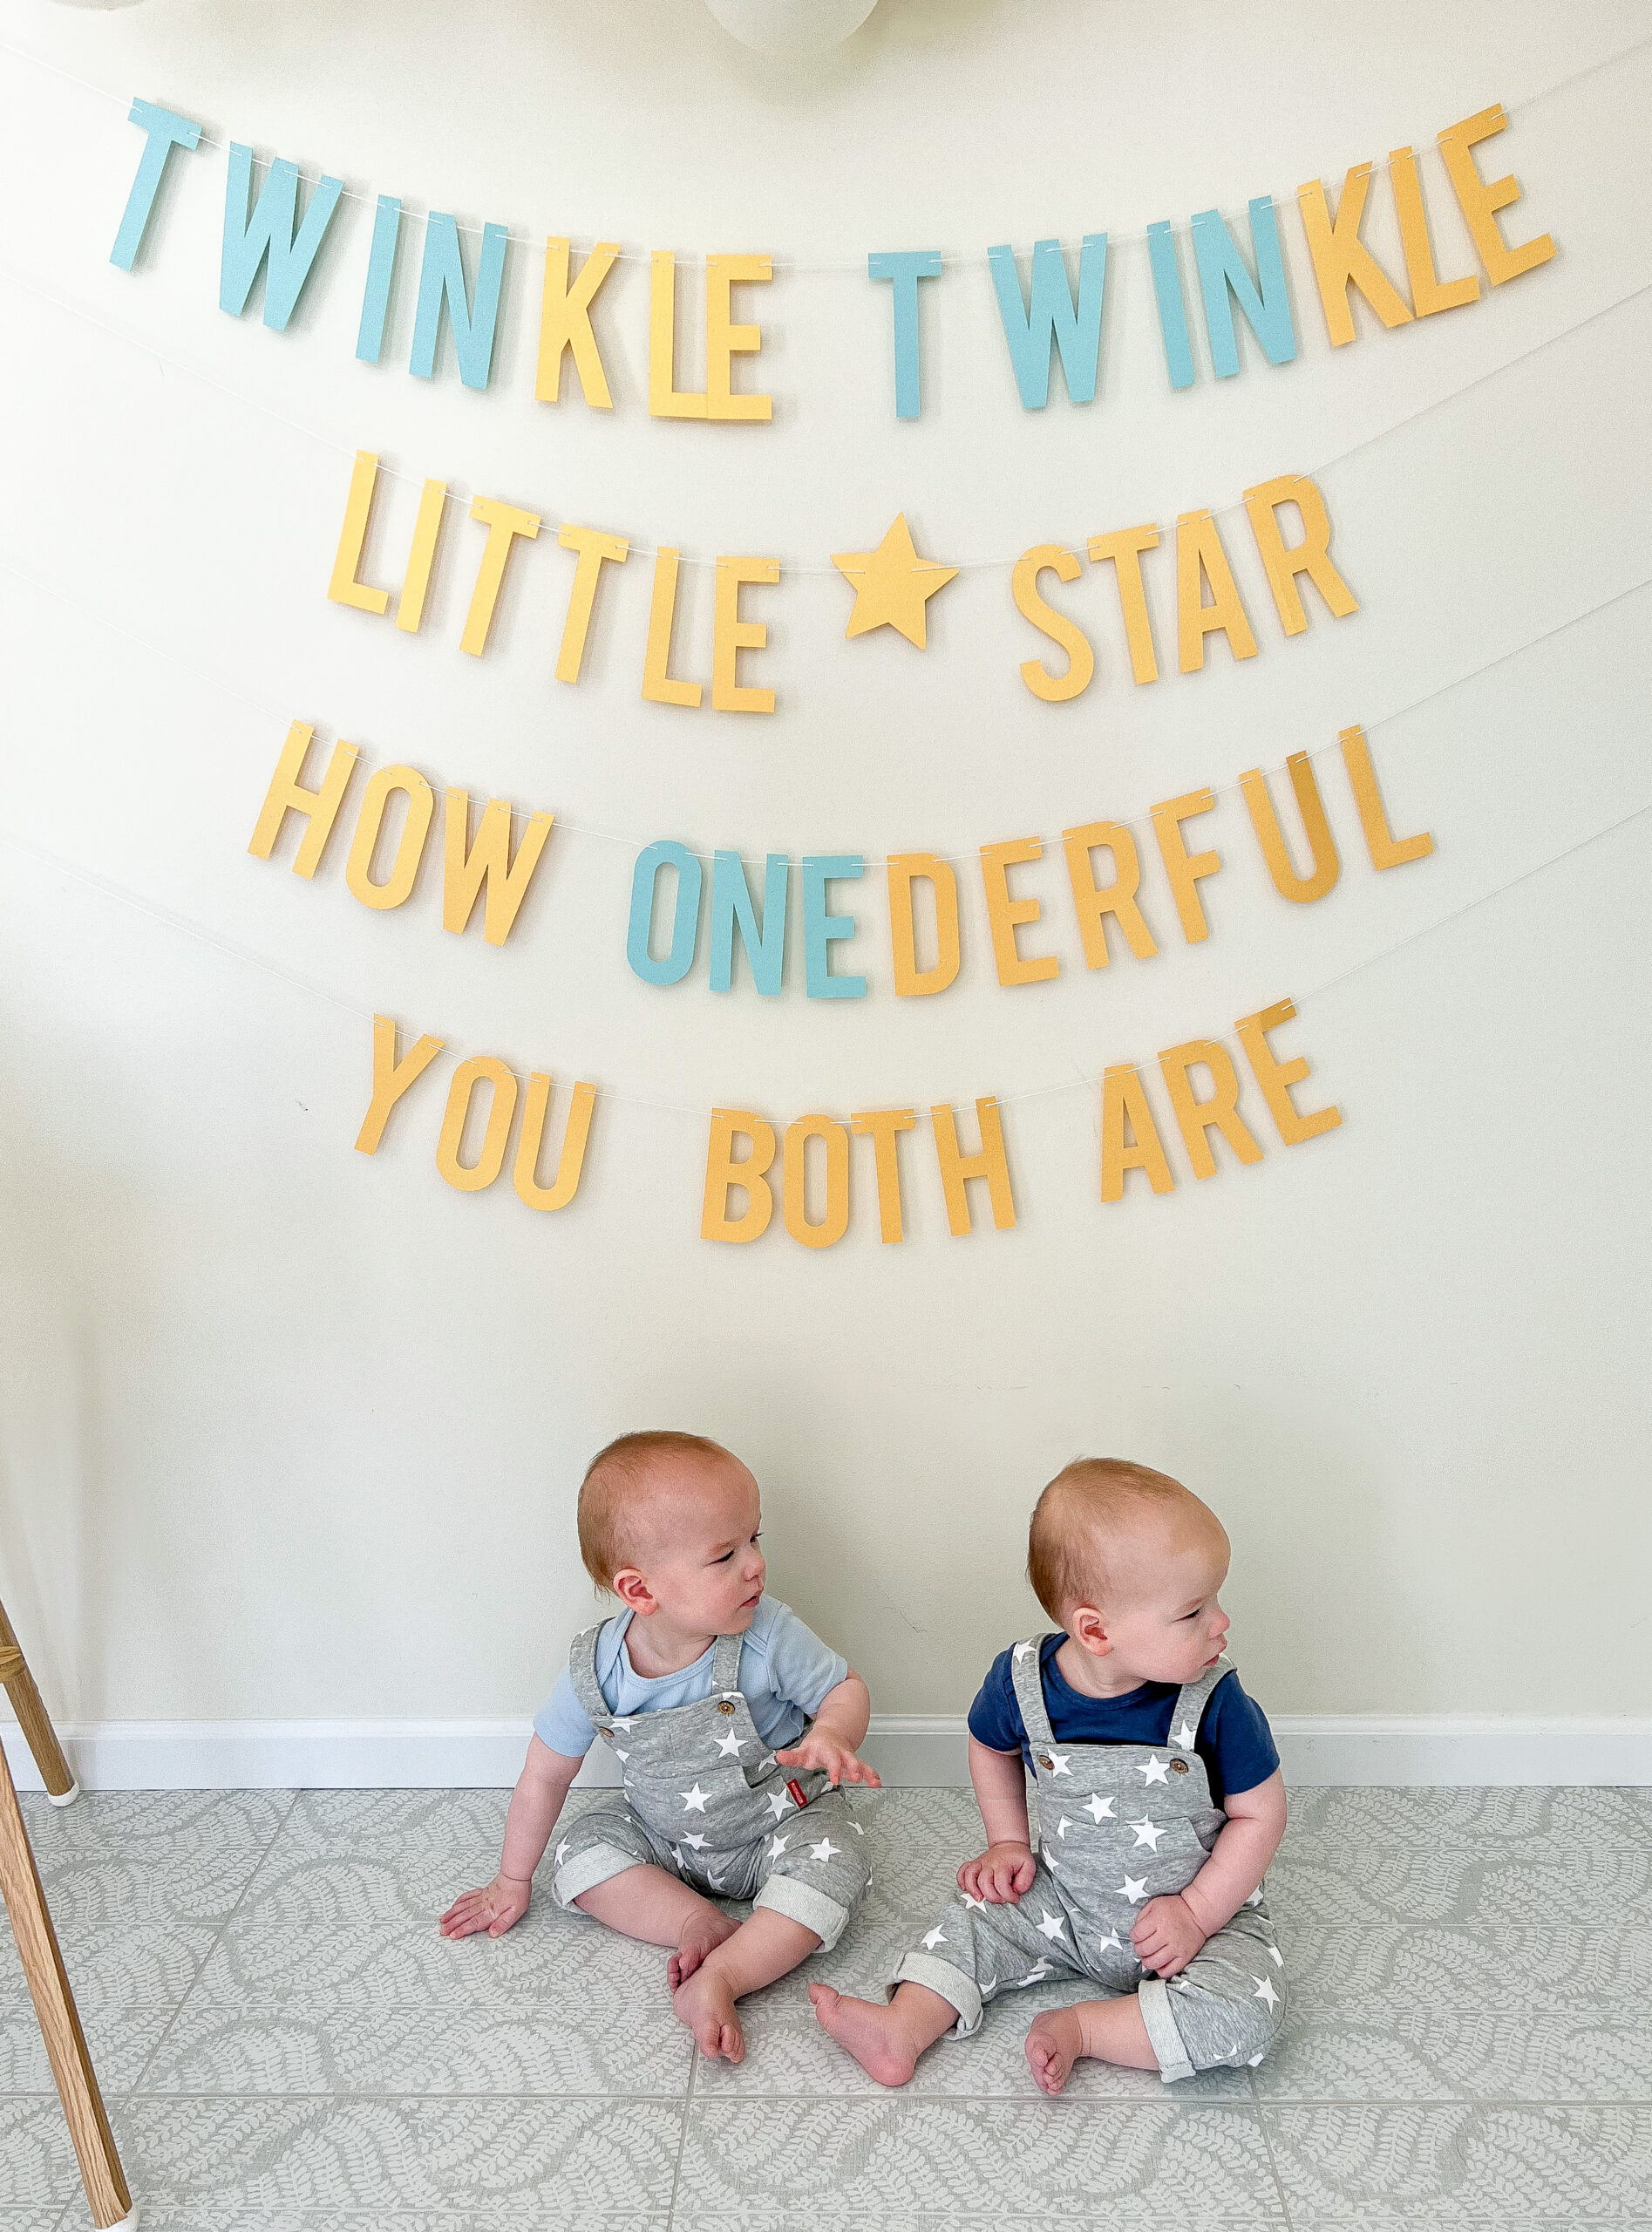 Twinkle Twinkle Little Star: Our Twins' First Birthday Party - Wedded Liss